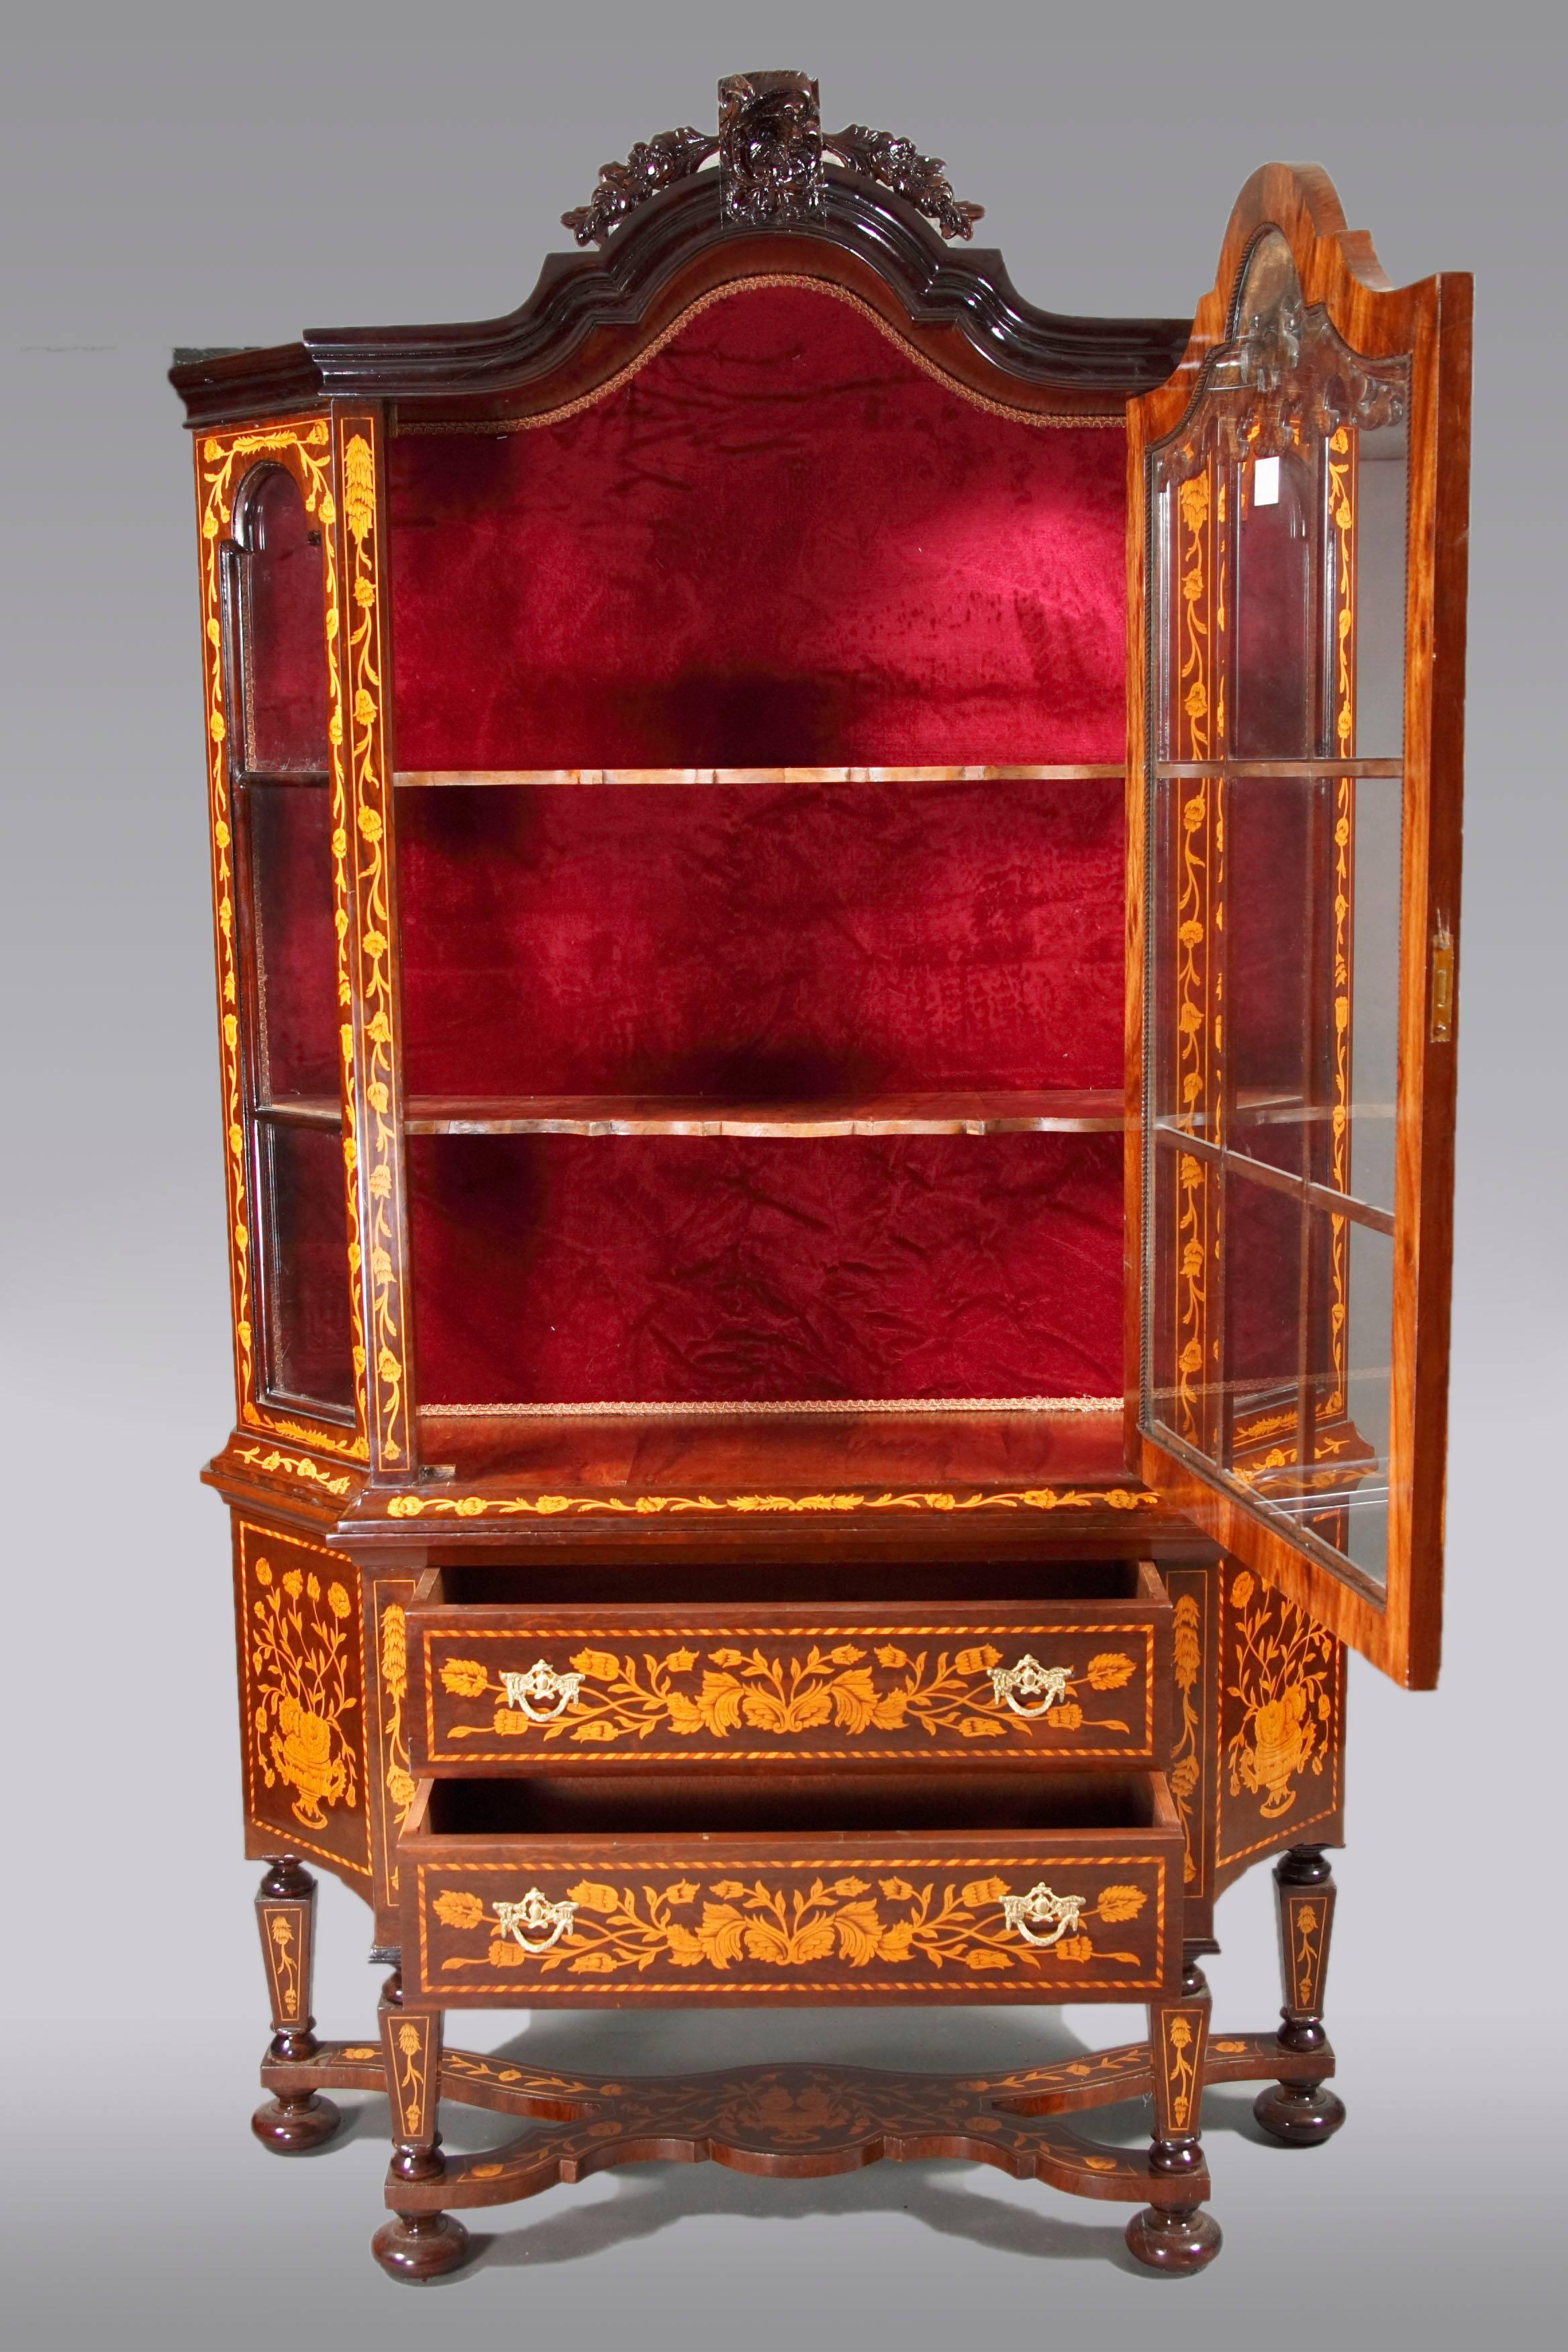 Light mahogany and maple on solid wood. Very rich, Baroque inlaid work. High-corpuscular body. On balustrade-shaped legs connected with an X-shaped ridge. Above two-wise frame base with profiled cover plate. Three-sided sprout-glazed, single-door